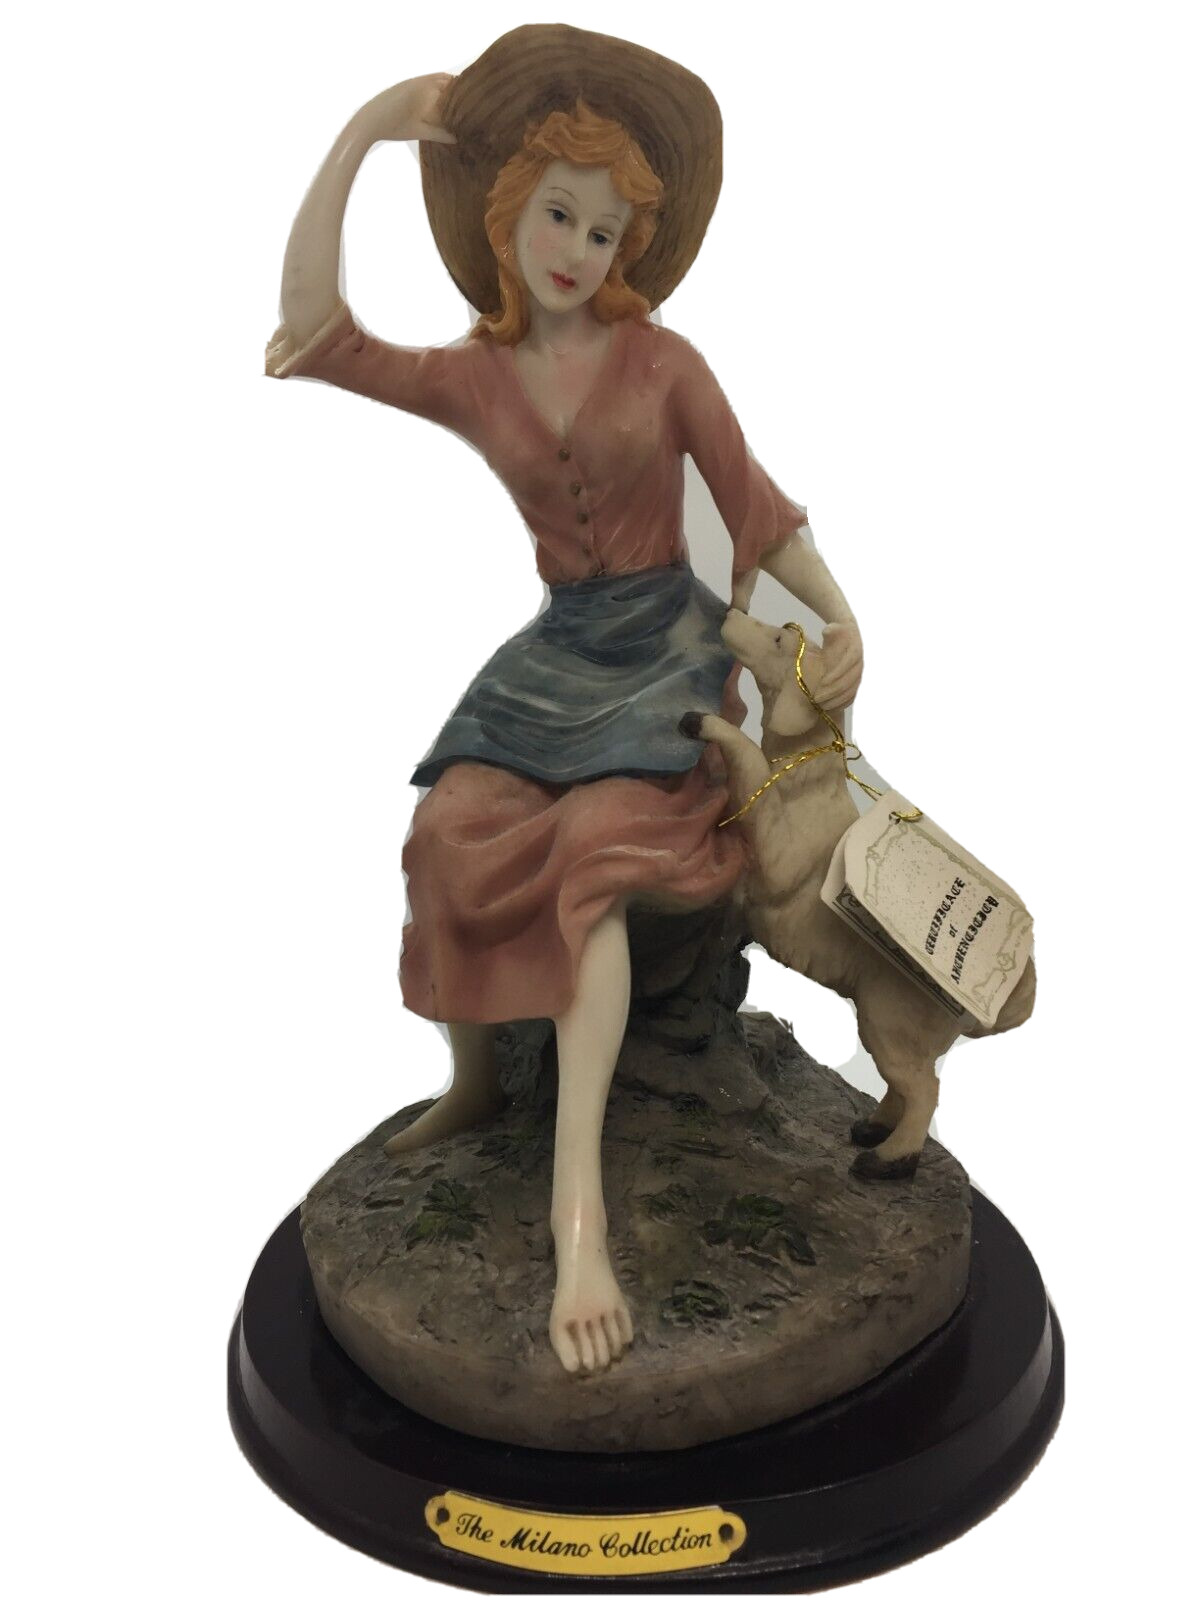 Vintage Milano Collection - Lady with Dog Resin Figurine, 32cms